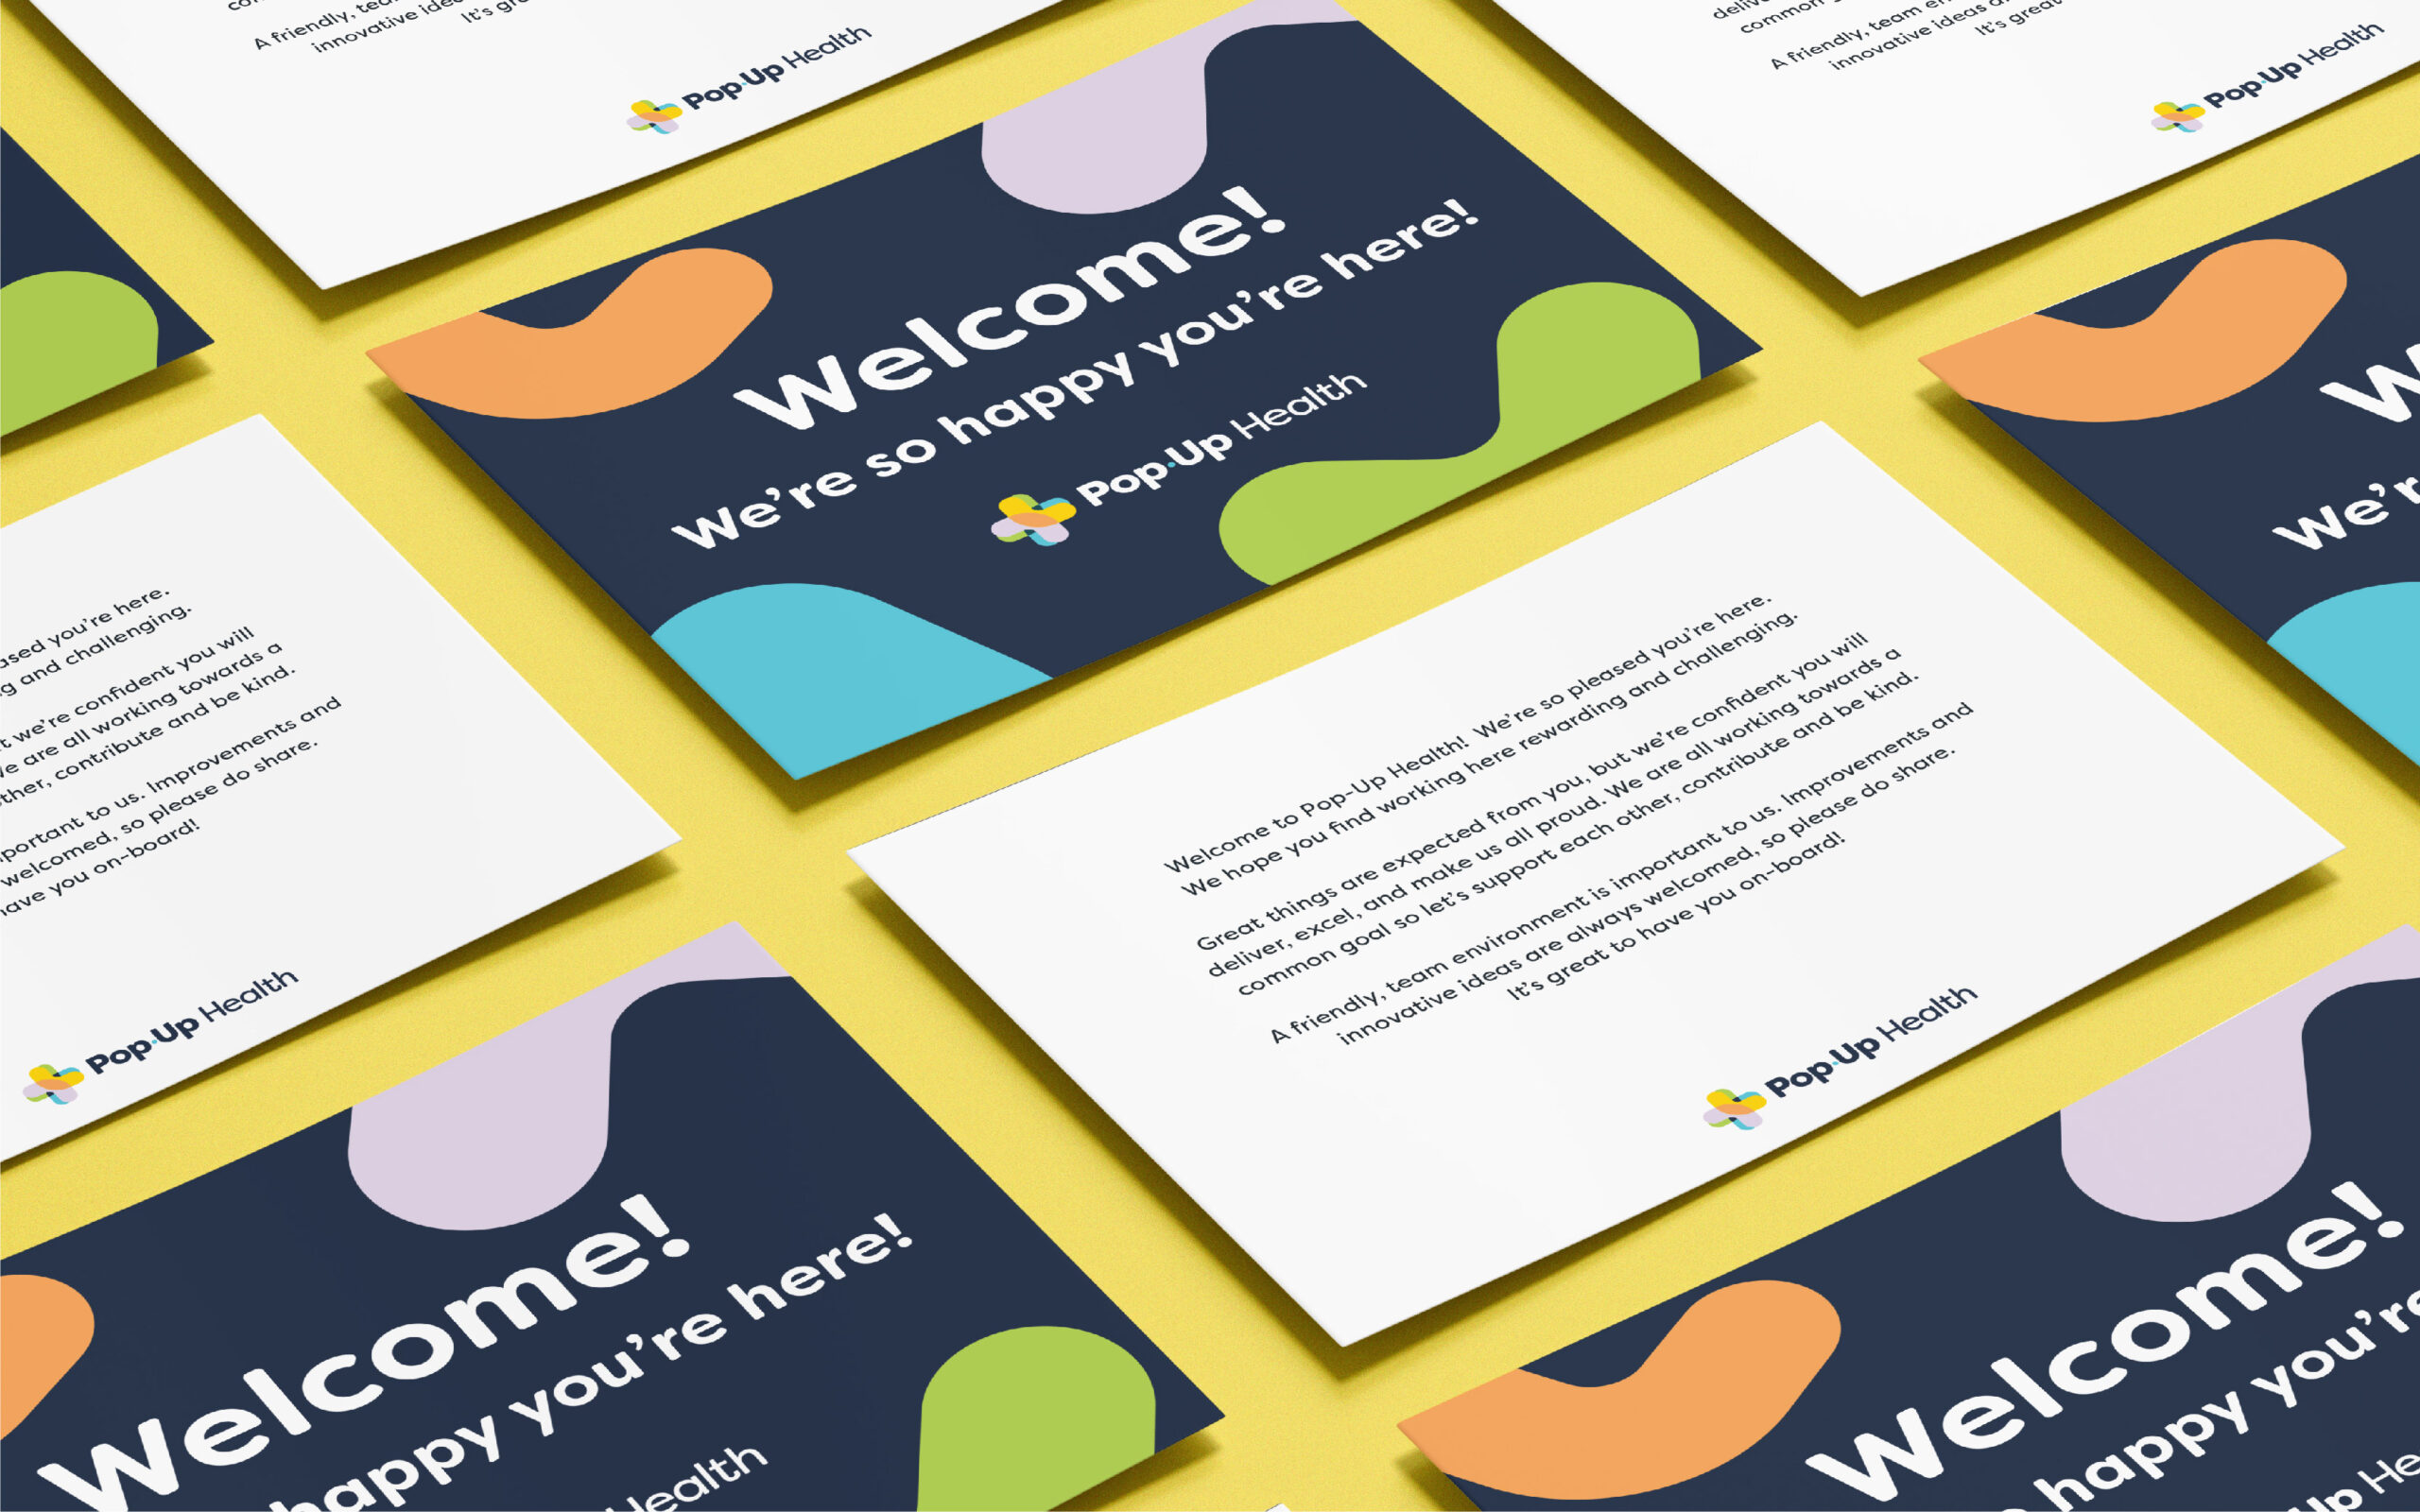 Pop-Up Health - Welcome cards